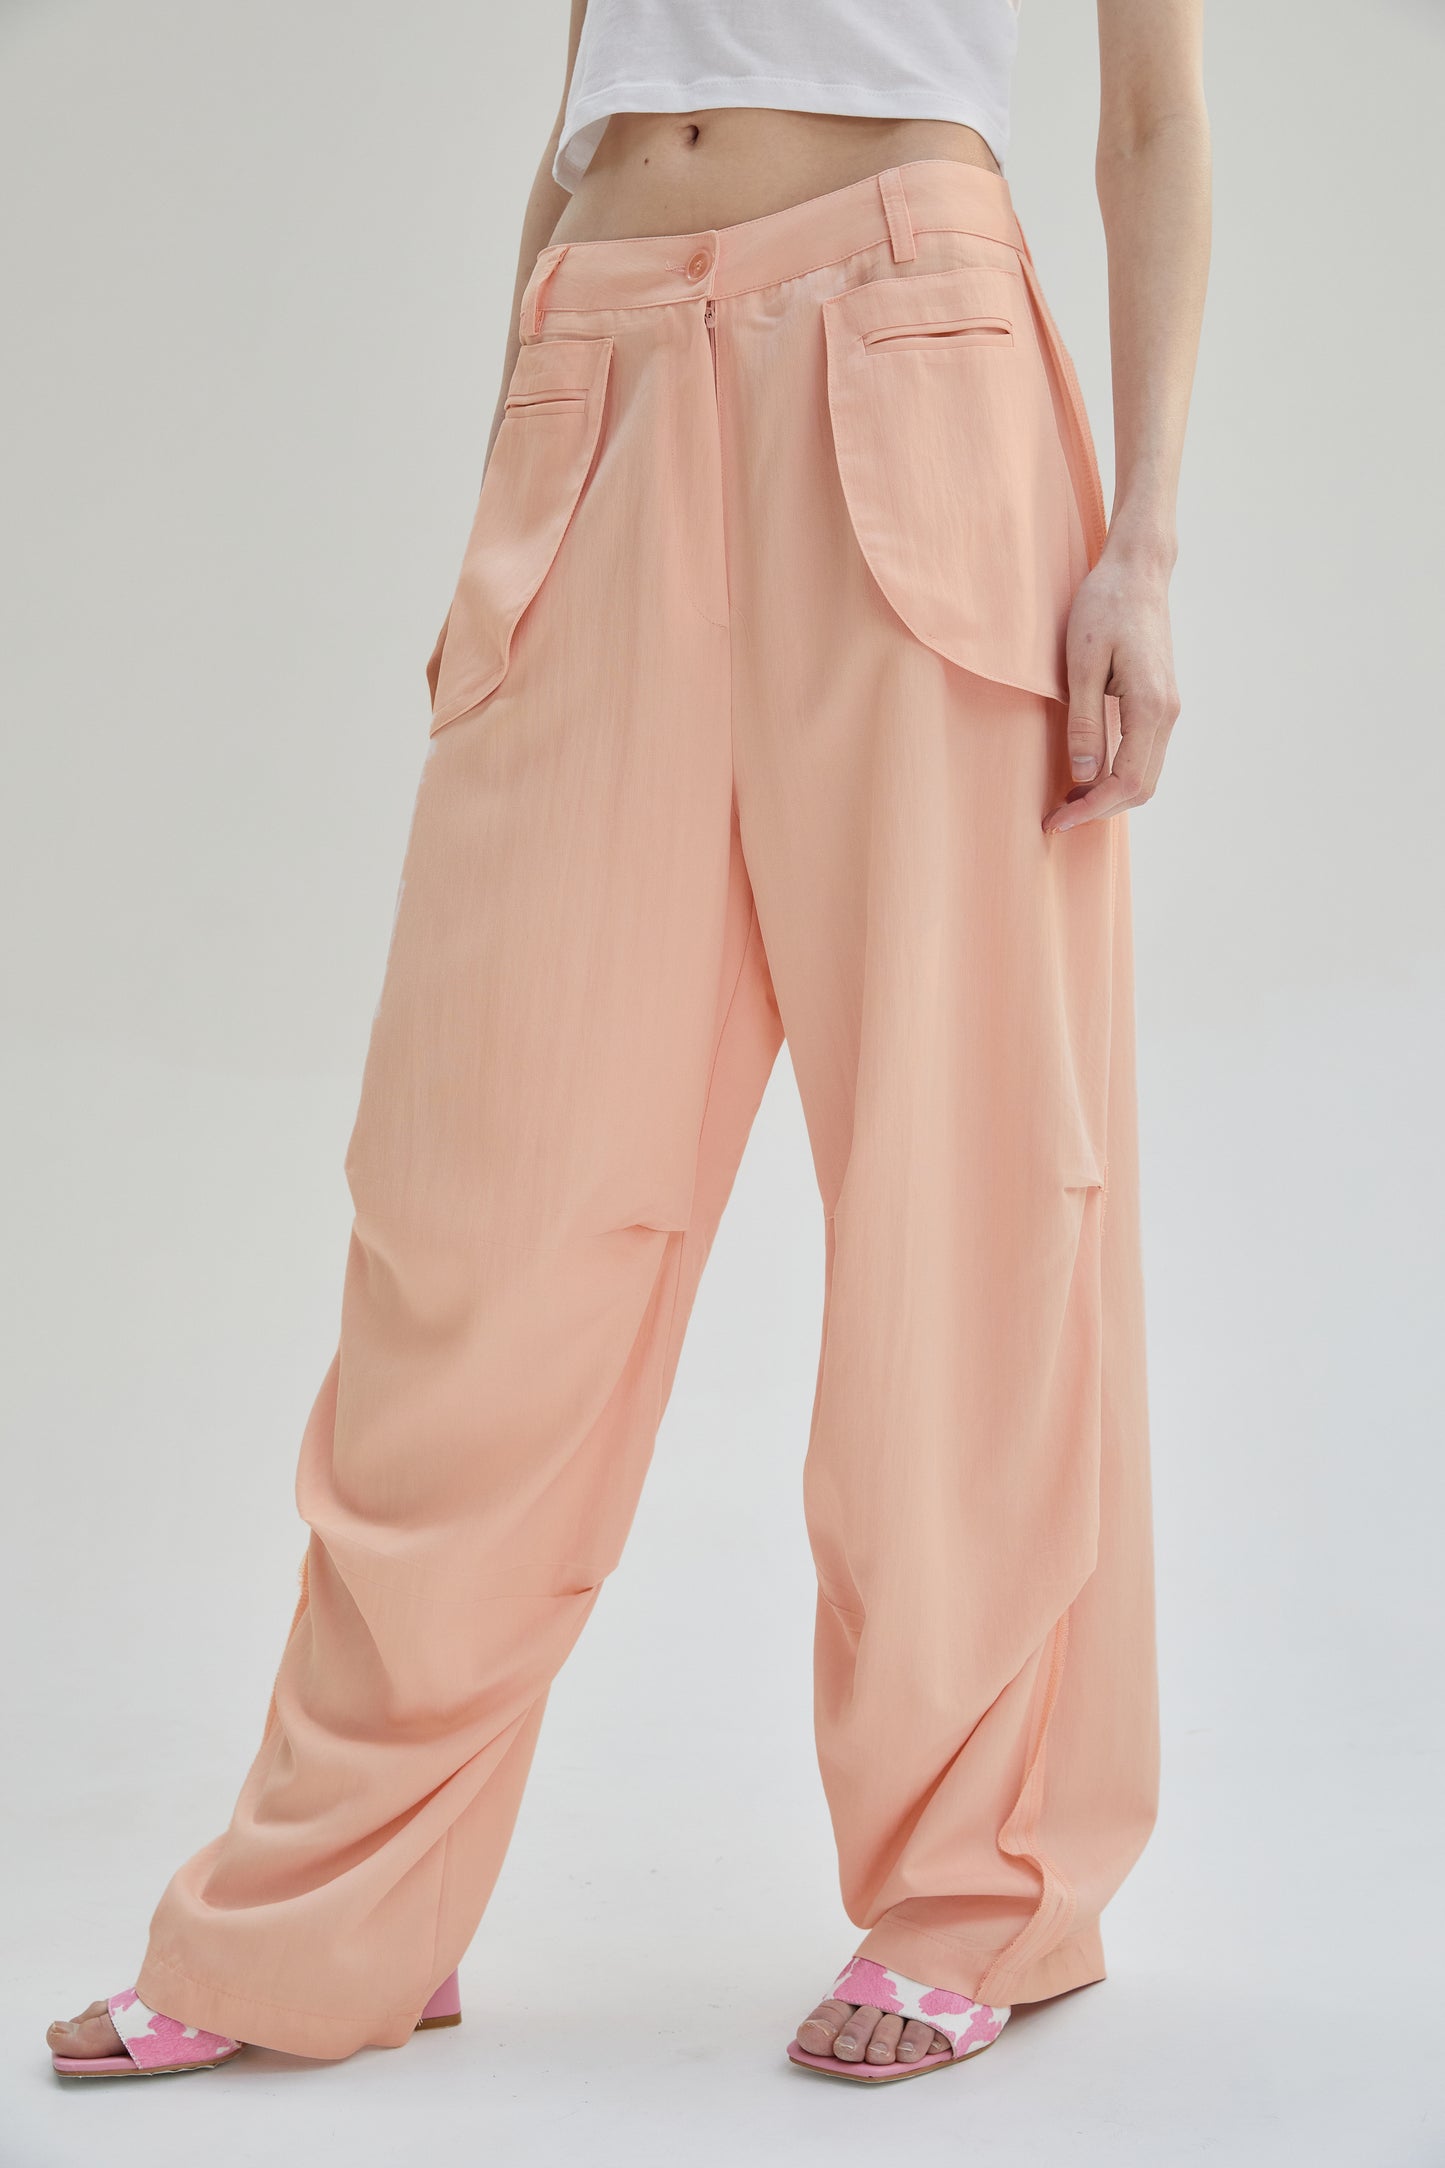 Inside Out Draped Cargo Pants, Salmon Pink